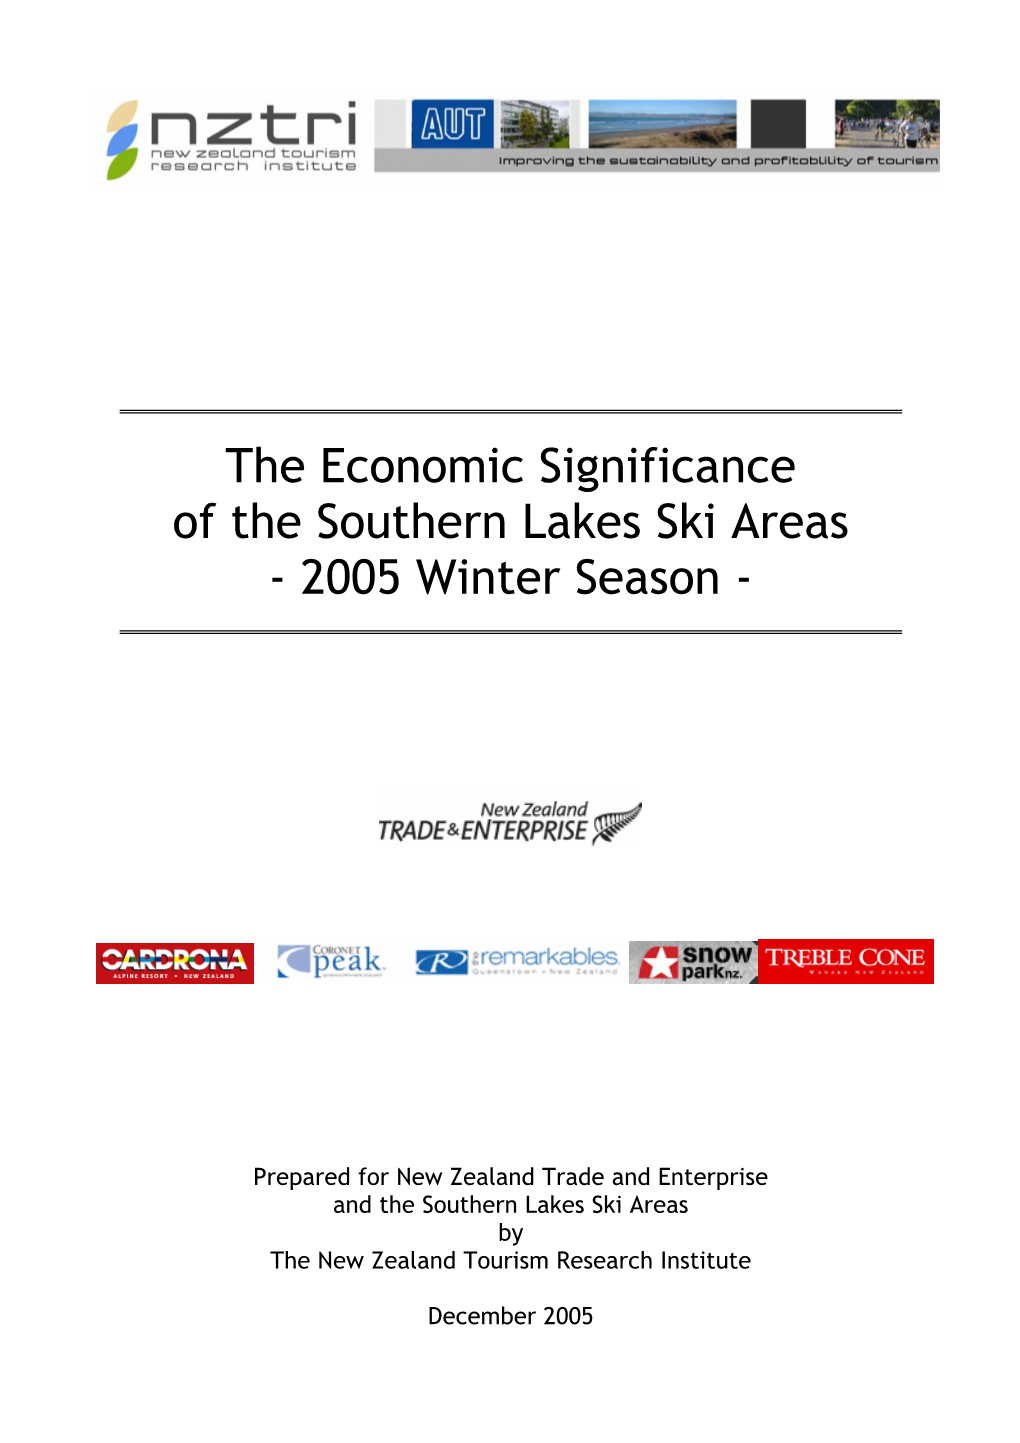 The Economic Significance of the Southern Lakes Ski Areas - 2005 Winter Season